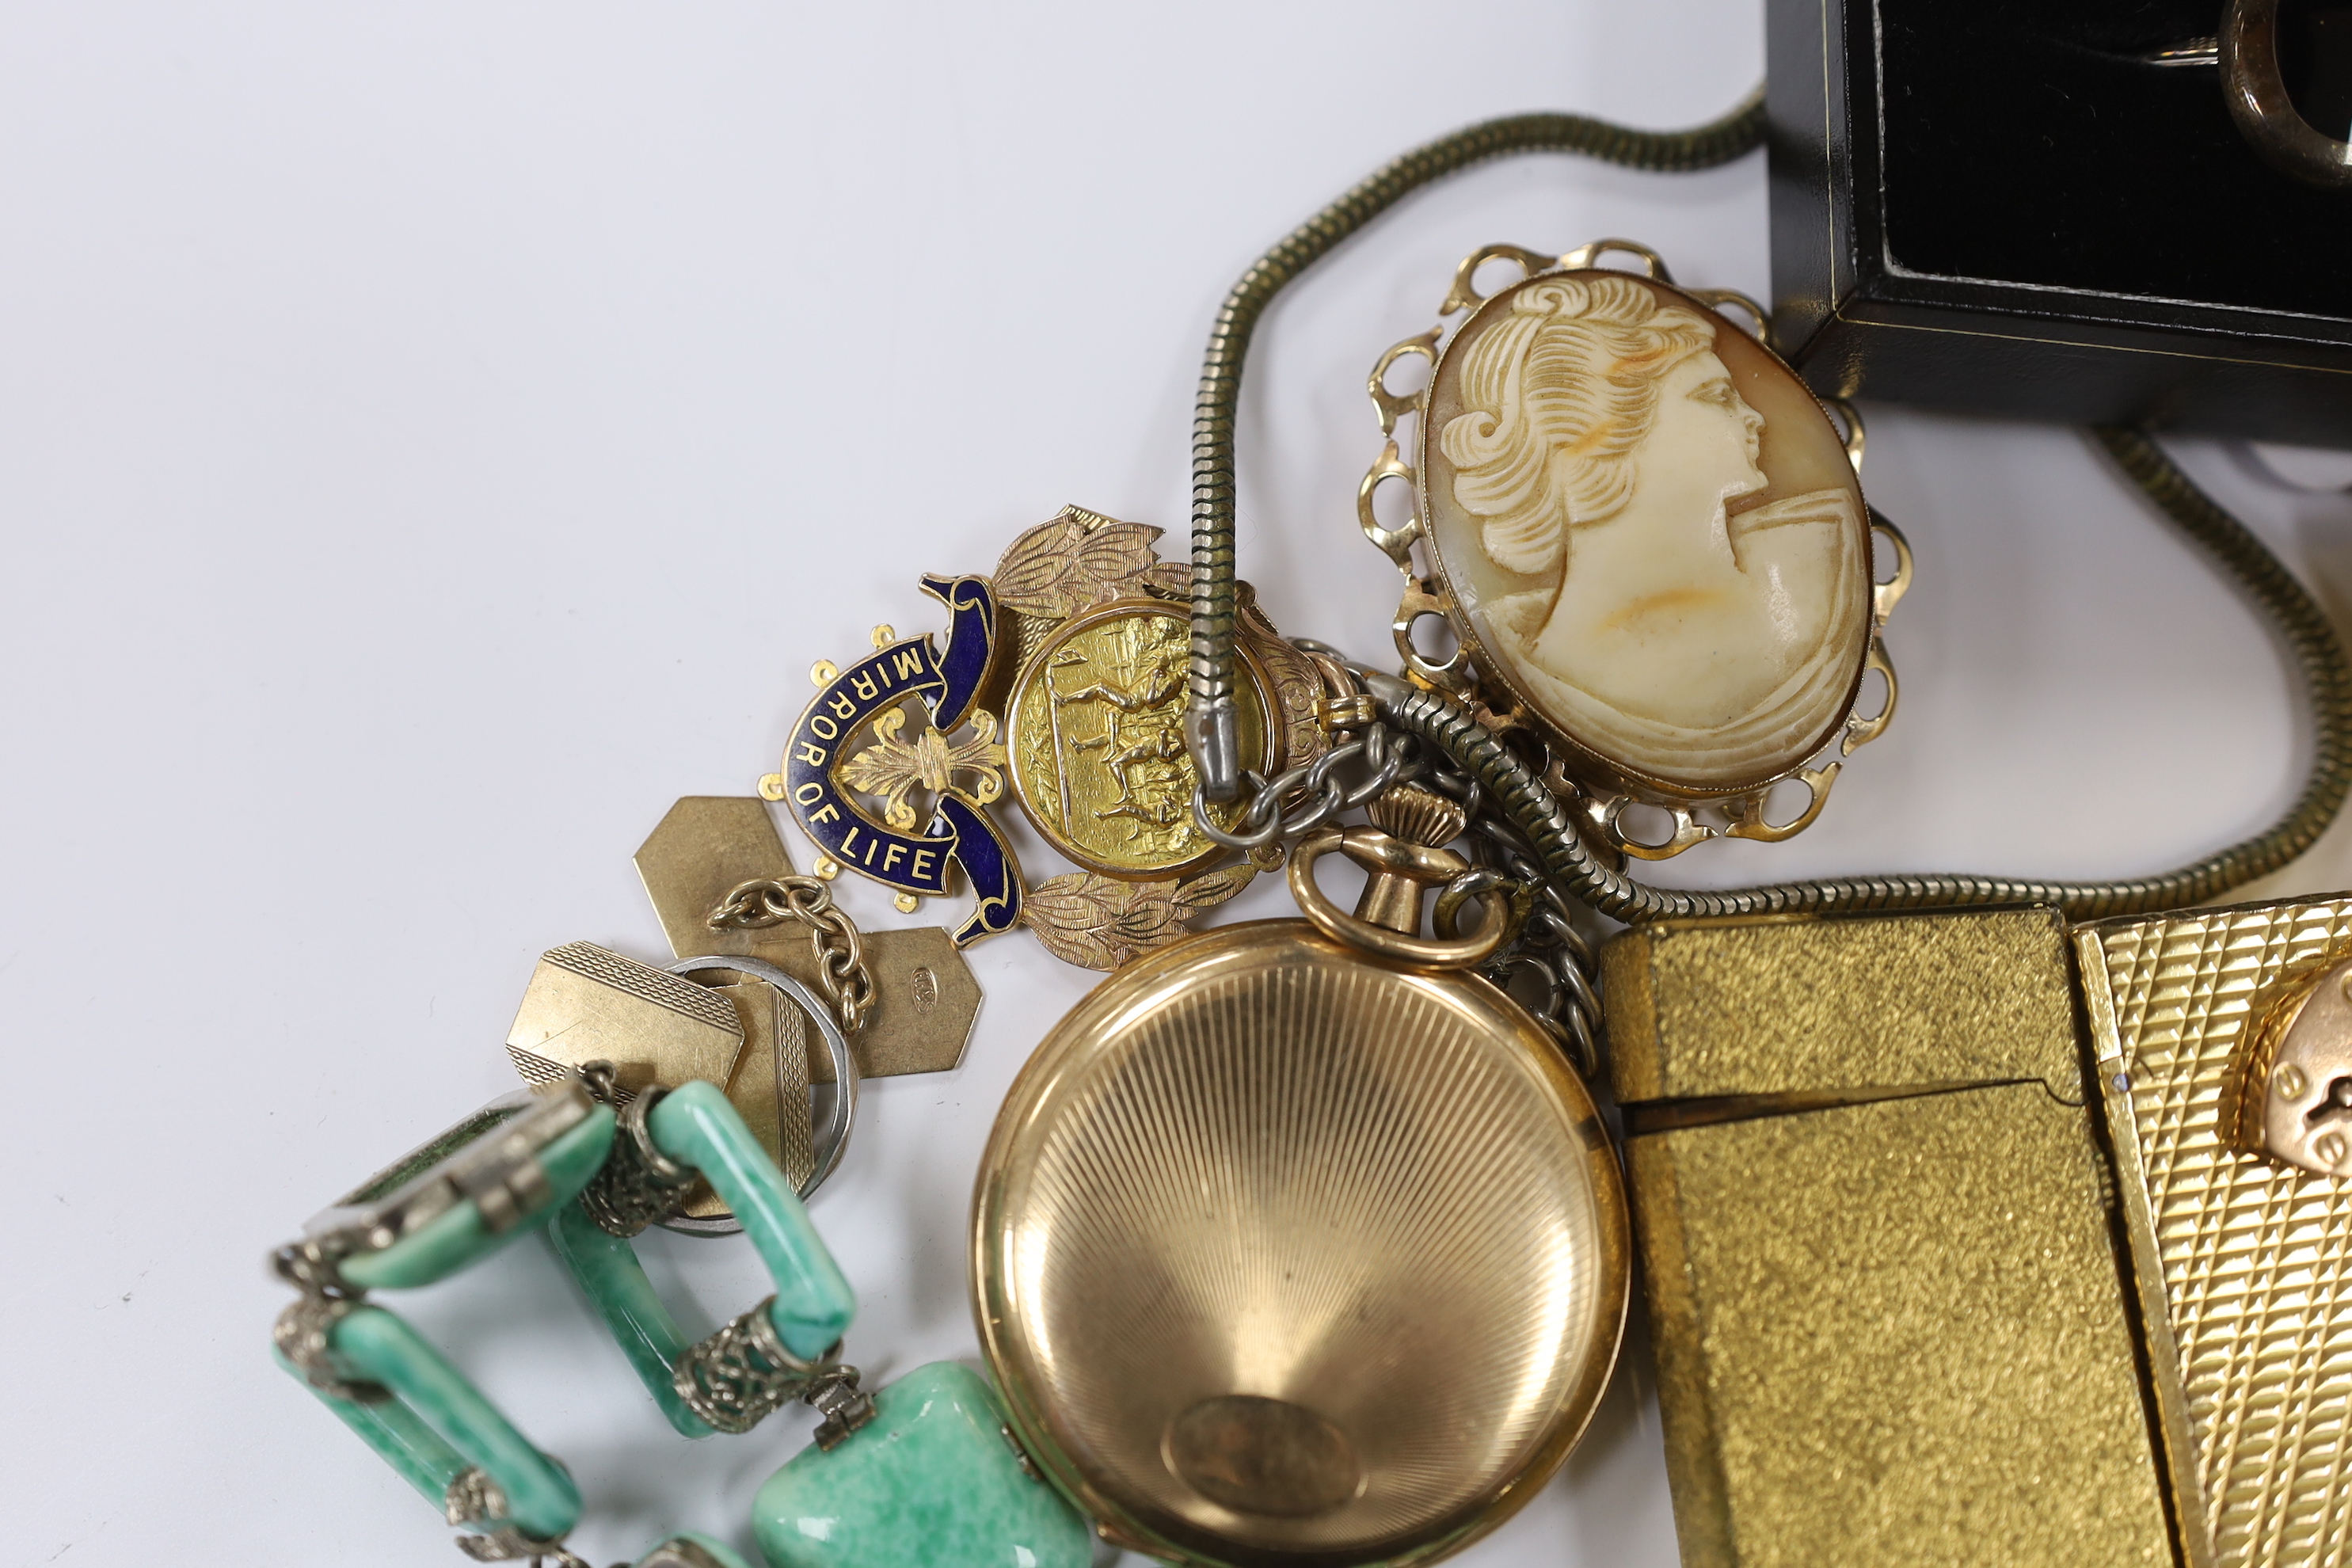 A pair of 9ct gold cufflinks, one other 9ct cufflink, a 9ct mounted cameo shell brooch, a gold plated pocket watch, with a 9ct gold medallion, a small platinum wedding band, a 9ct and synthetic colour change corundum dre